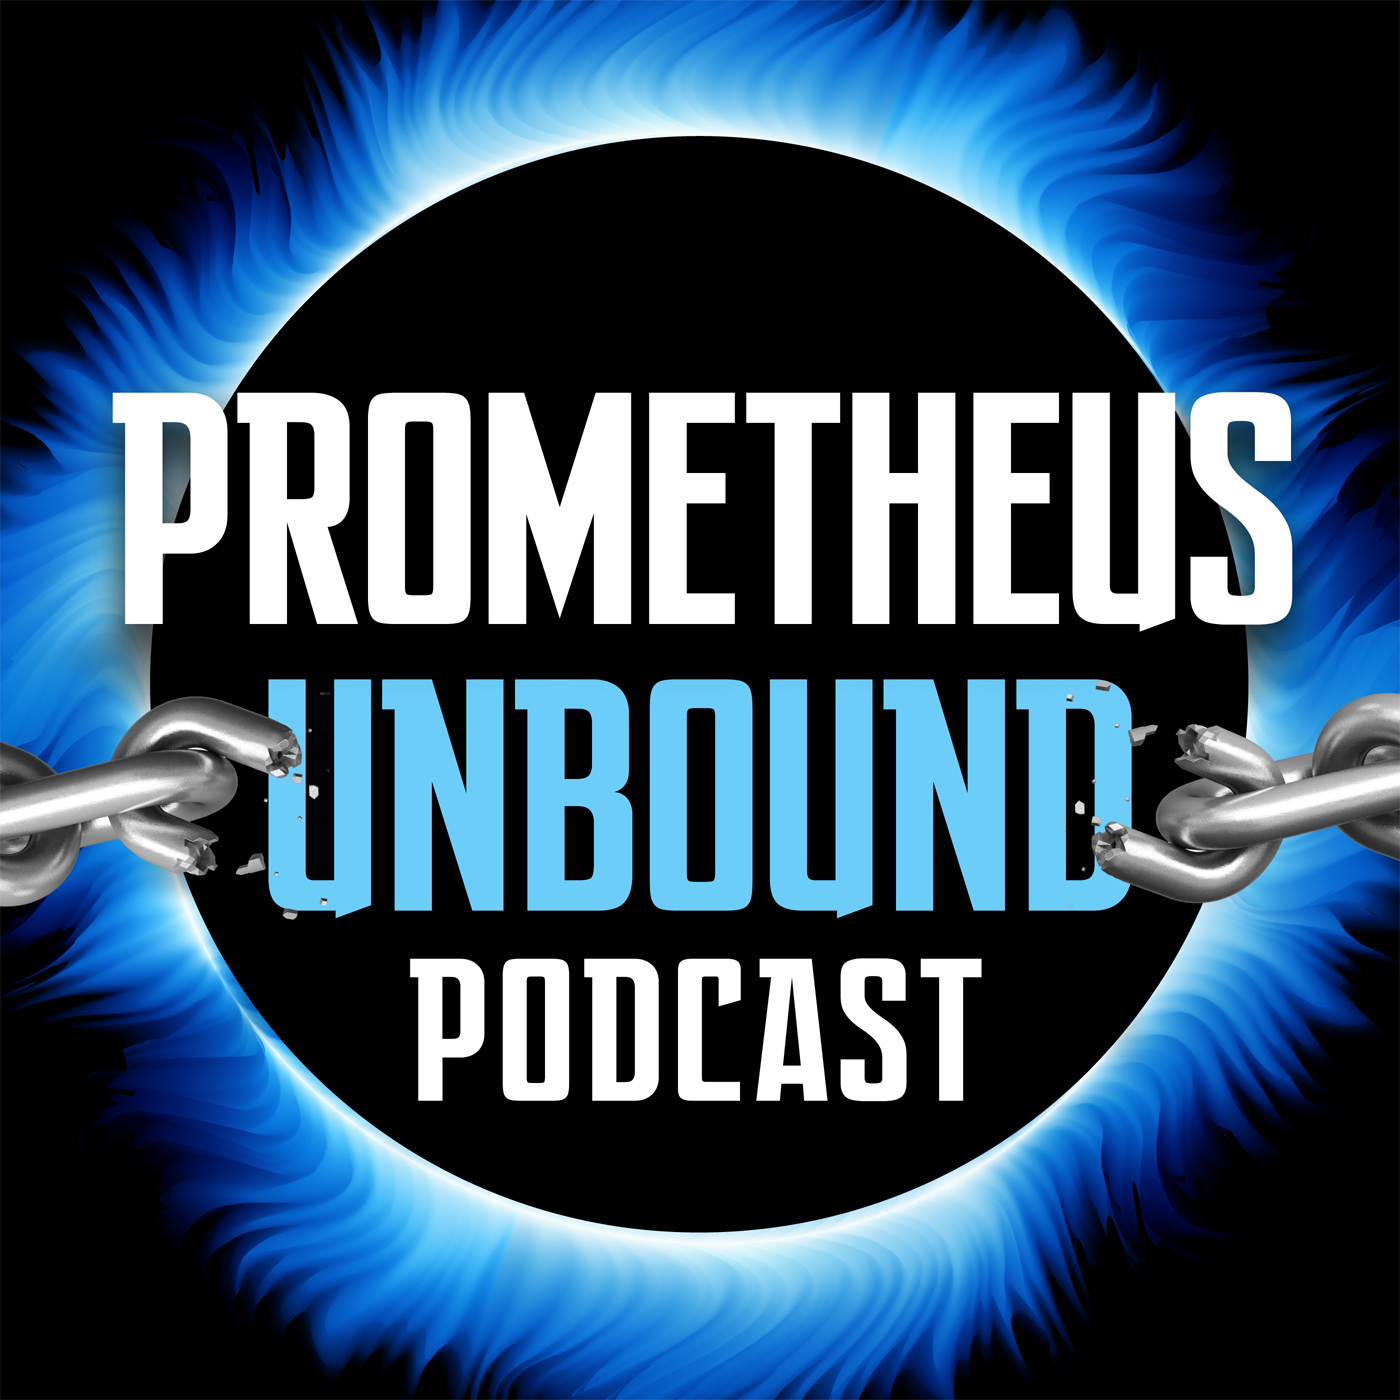 Prometheus Unbound Podcast: Libertarians Talking About Science Fiction and Fantasy